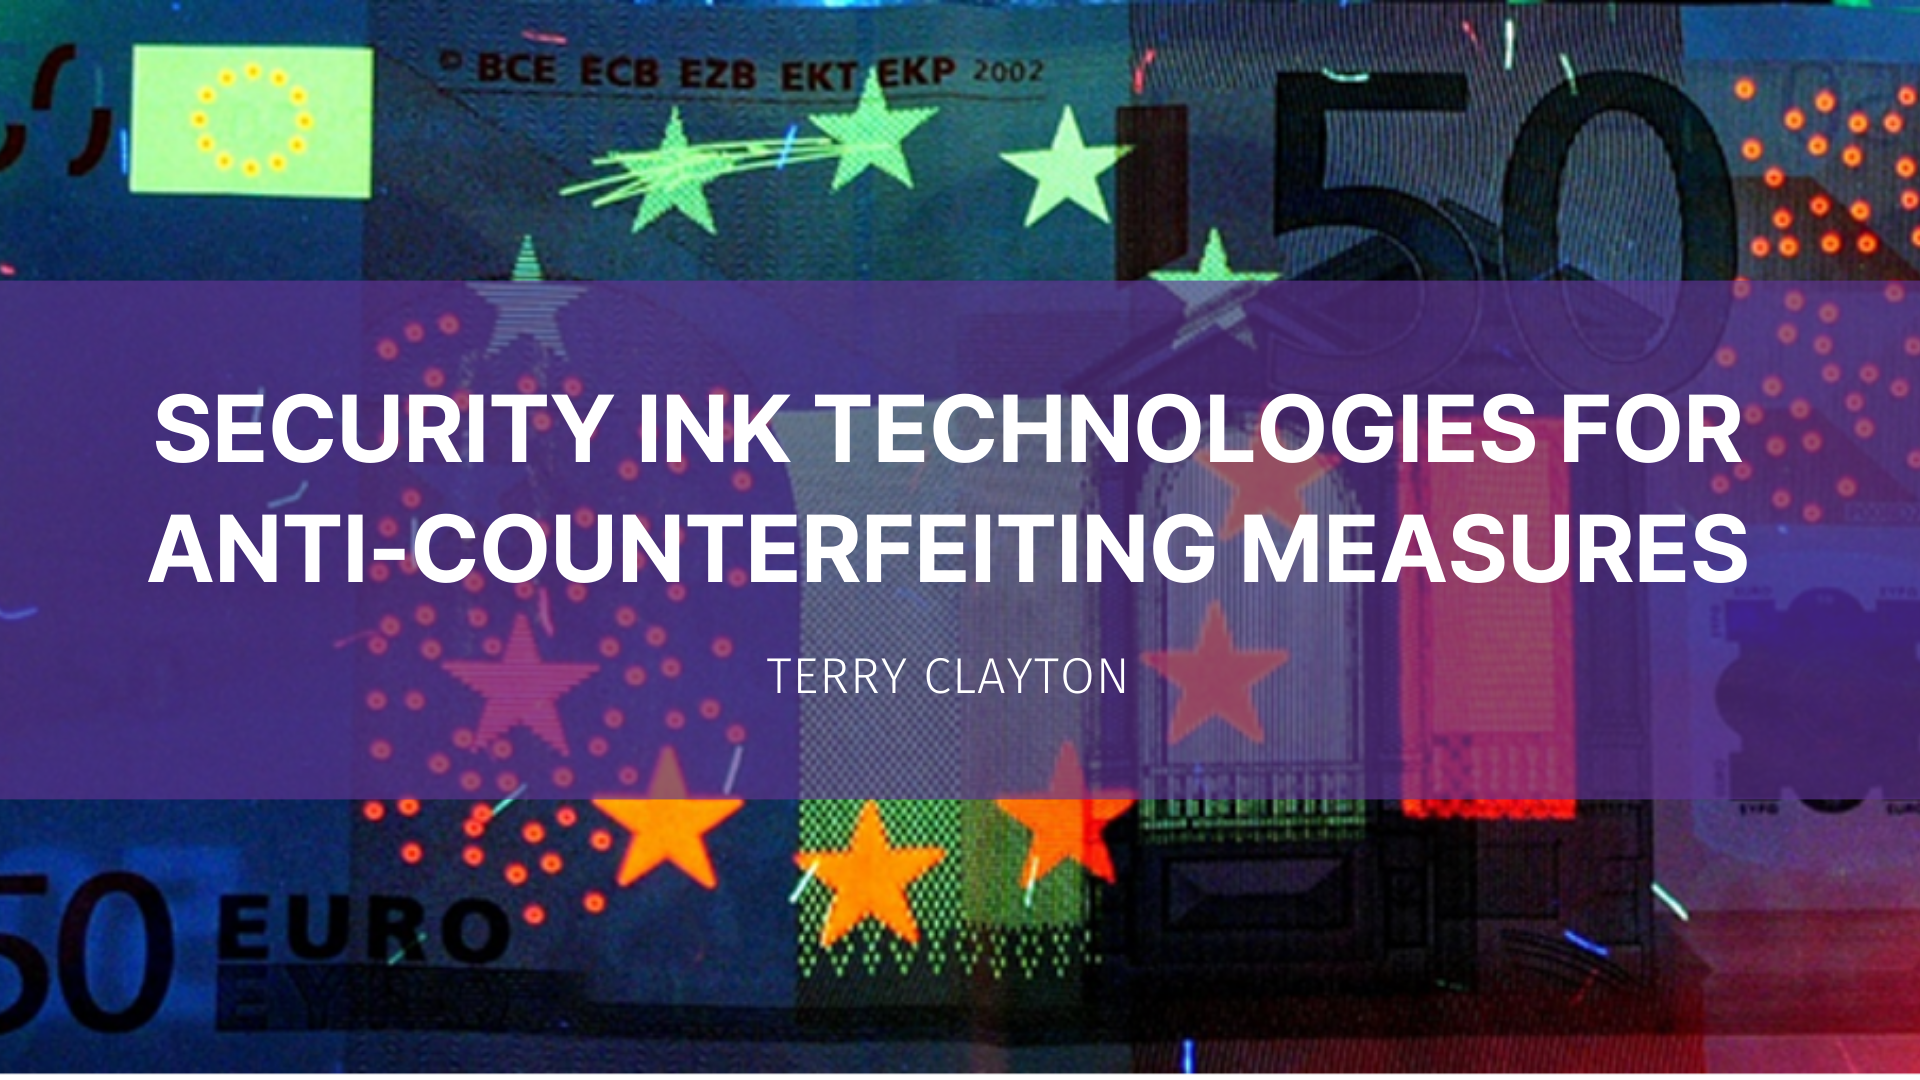 Featured image for “Security Ink Technologies for Anti-Counterfeiting Measures”